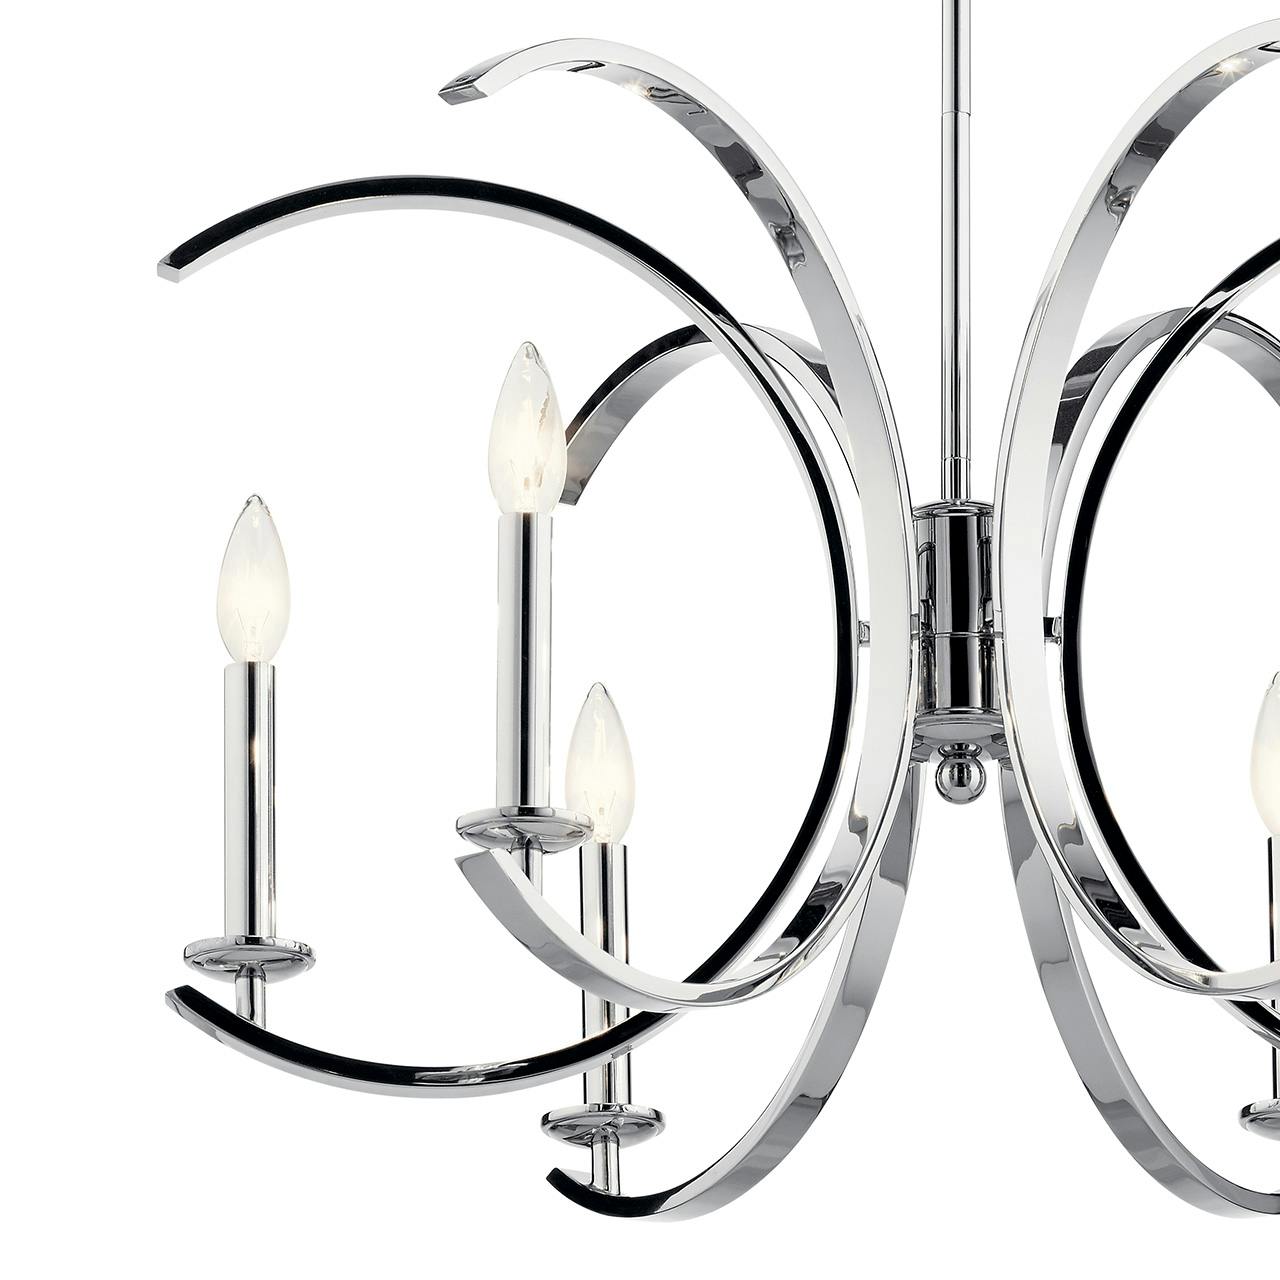 Close up view of the Cassadee 16.5" 6 Light Chandelier Chrome on a white background